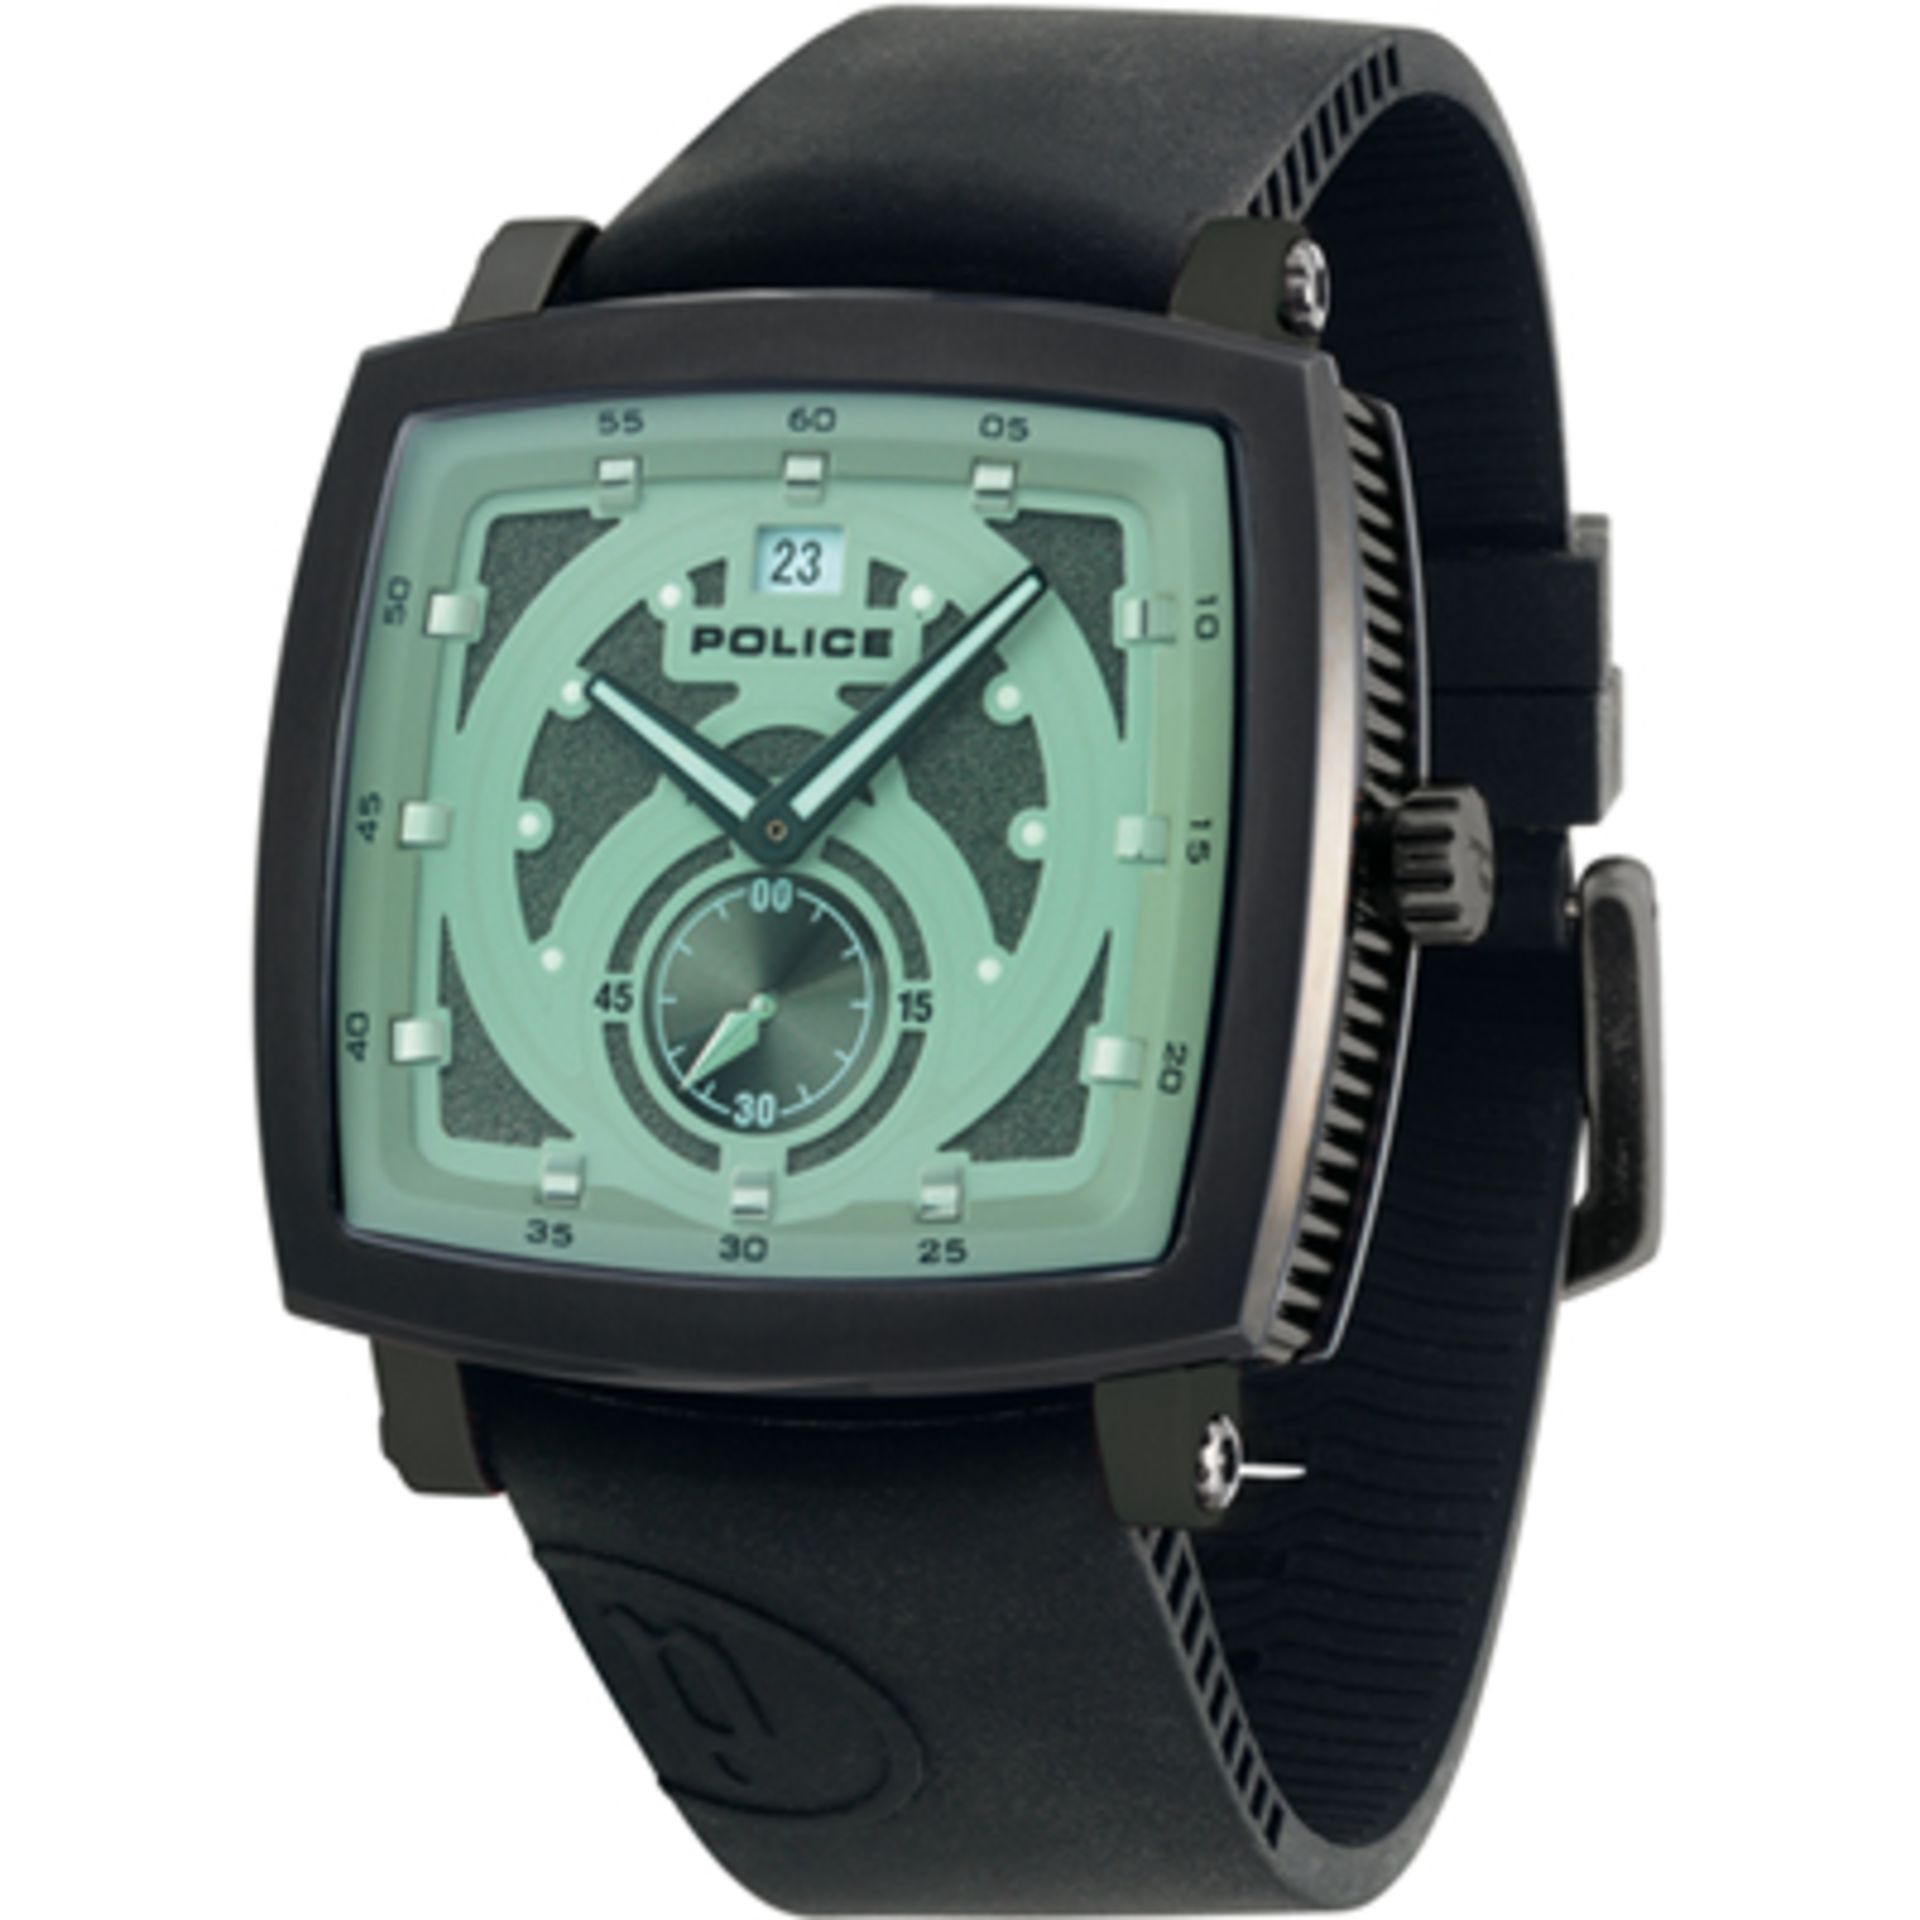 MENS POLICE WATCH (DELIVERY BAND A)